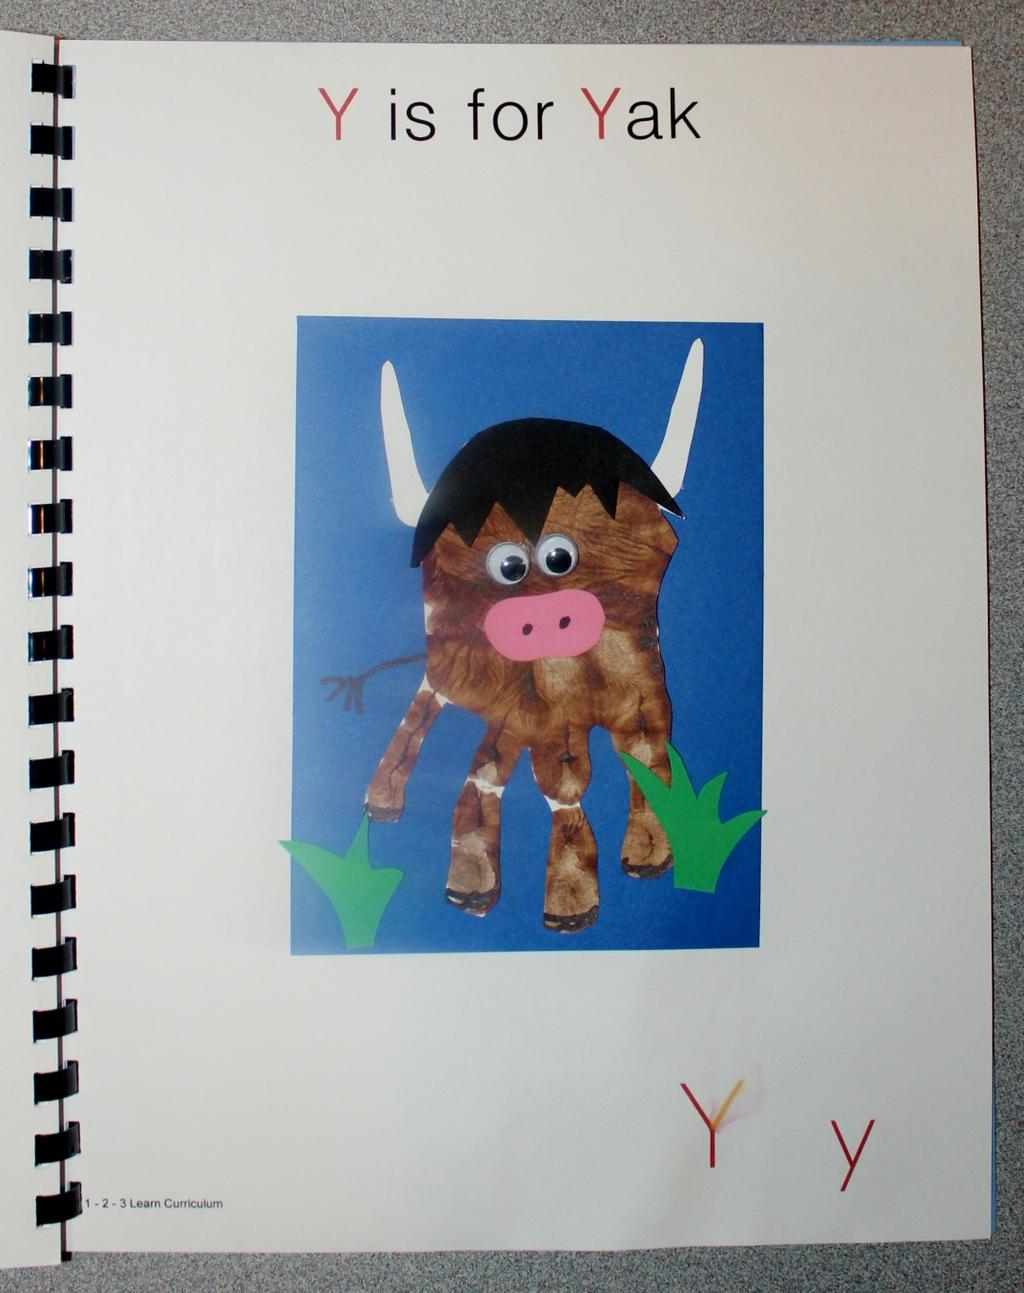 Y is for Yak Paint the child s hand brown and place on white card stock. When dry, trim and place on a piece of blue card stock.